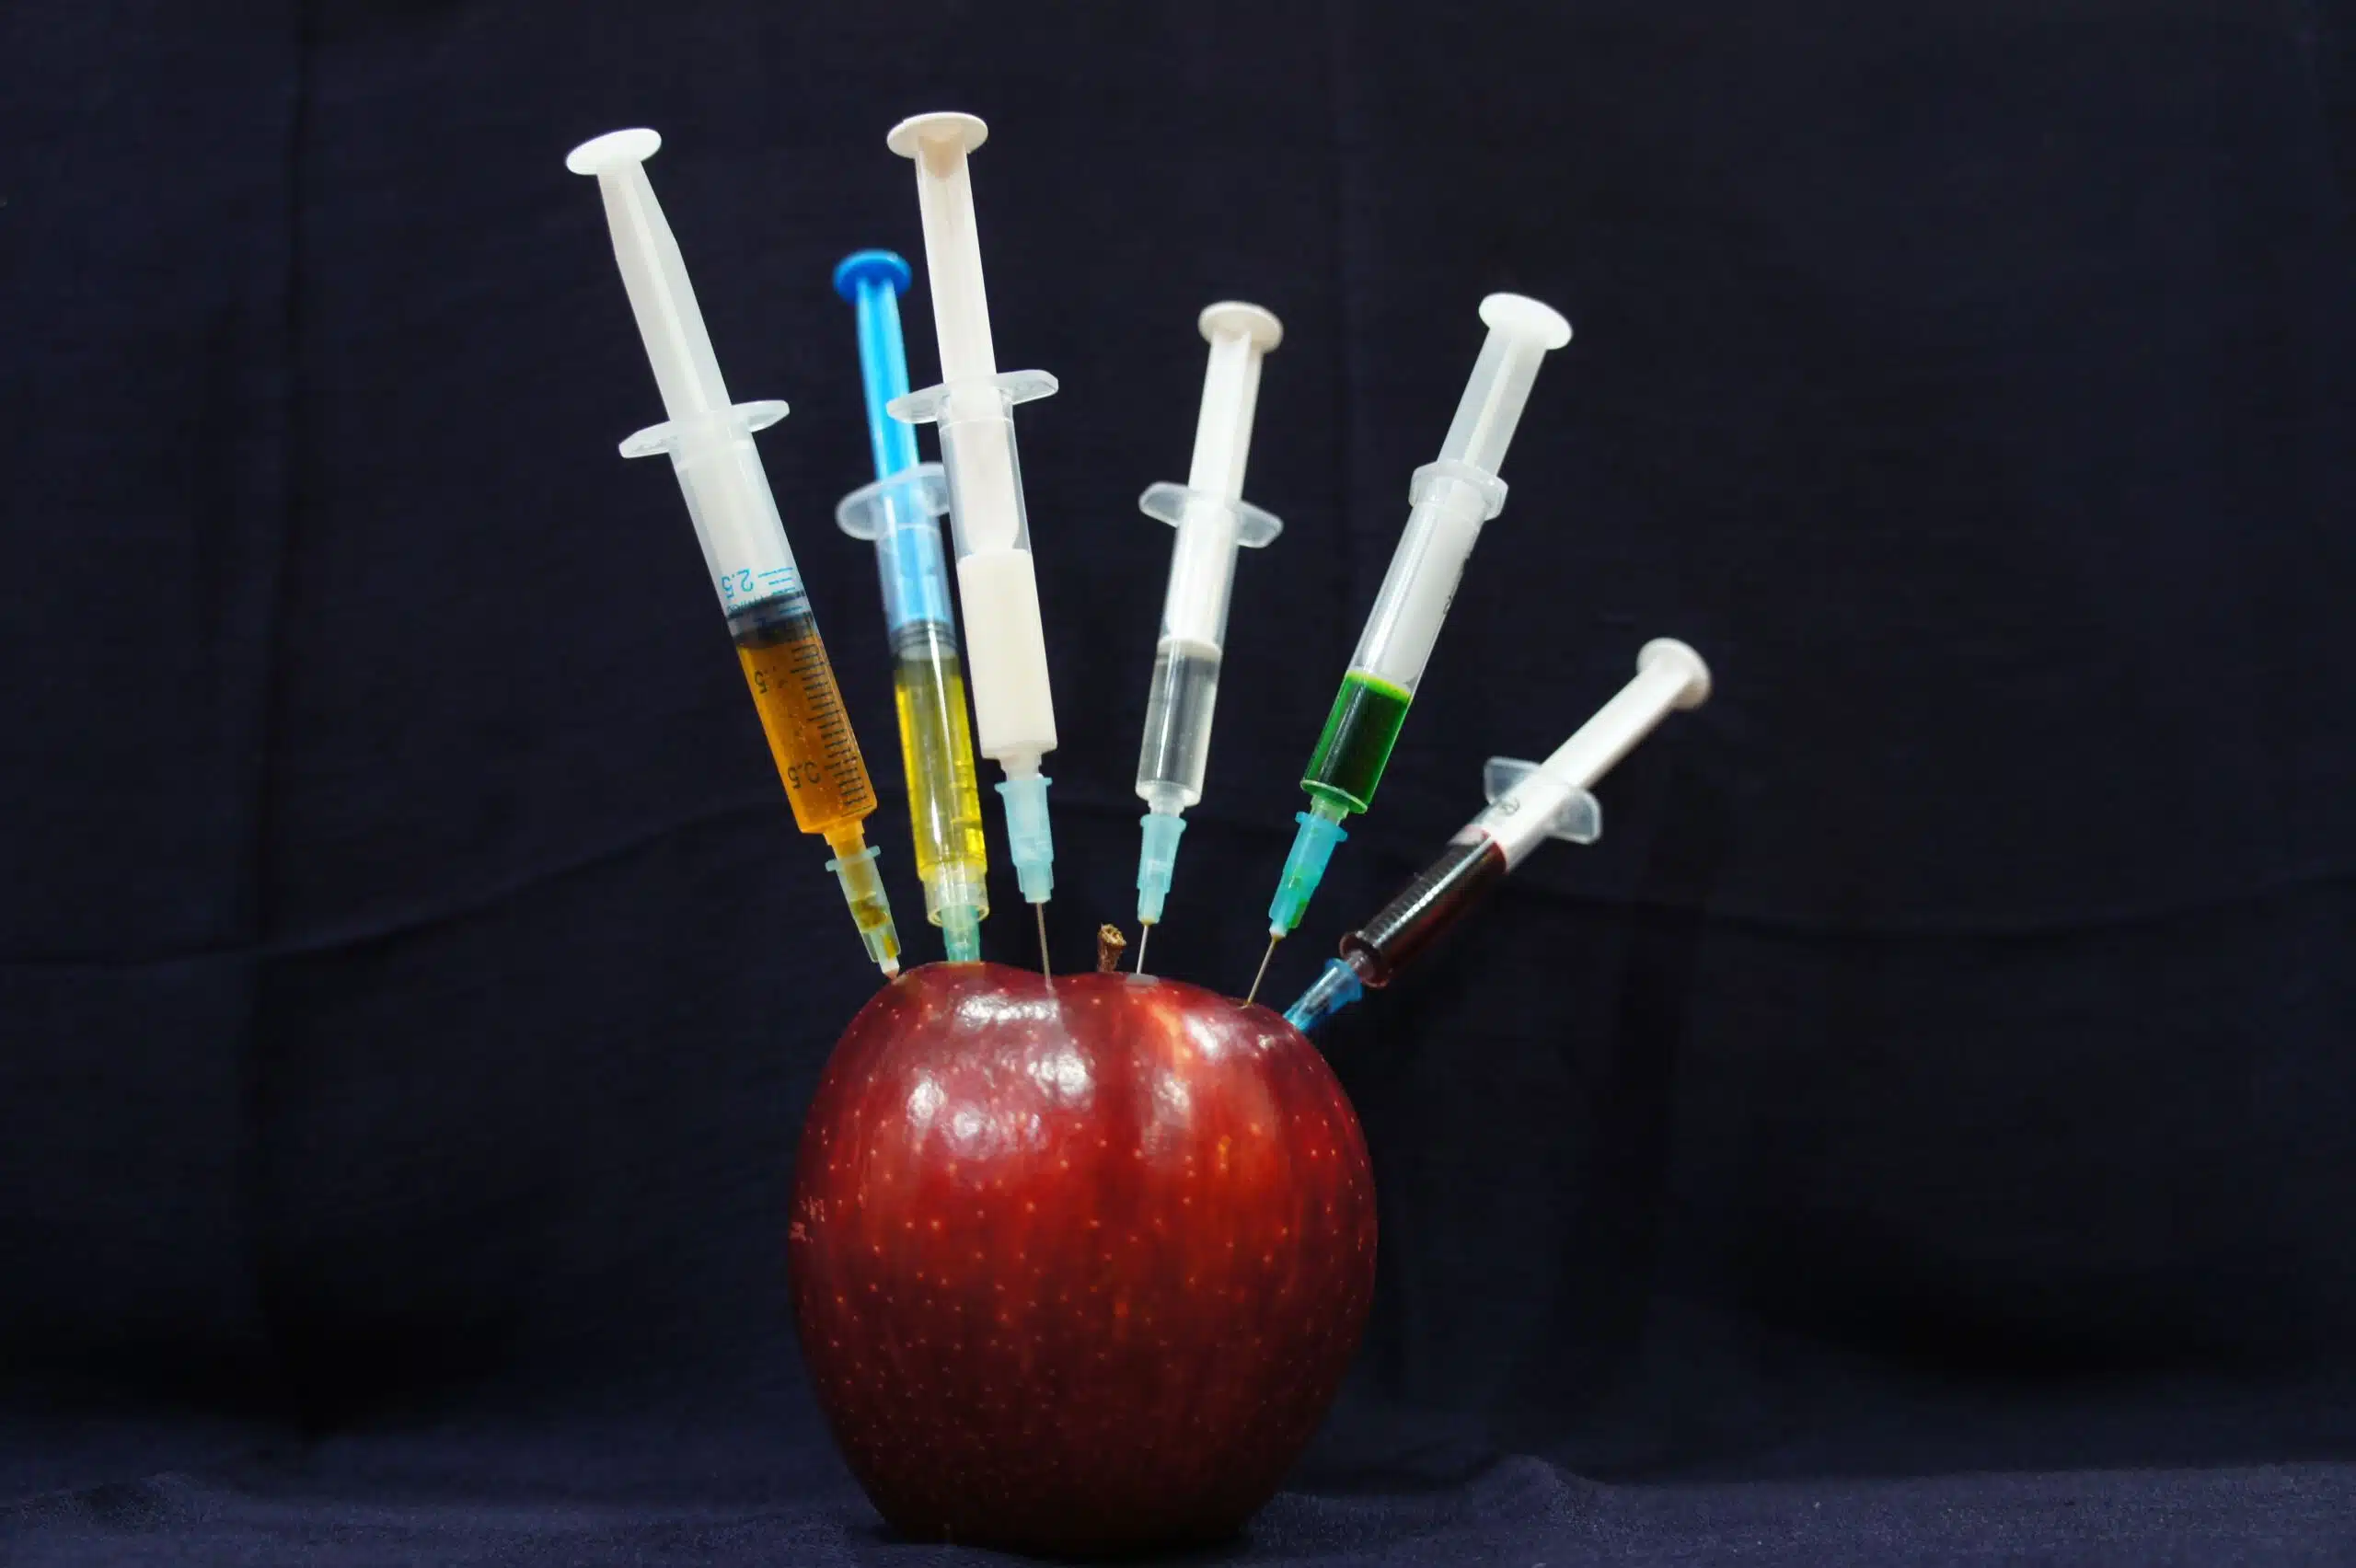 An apple with syringes stuck in it